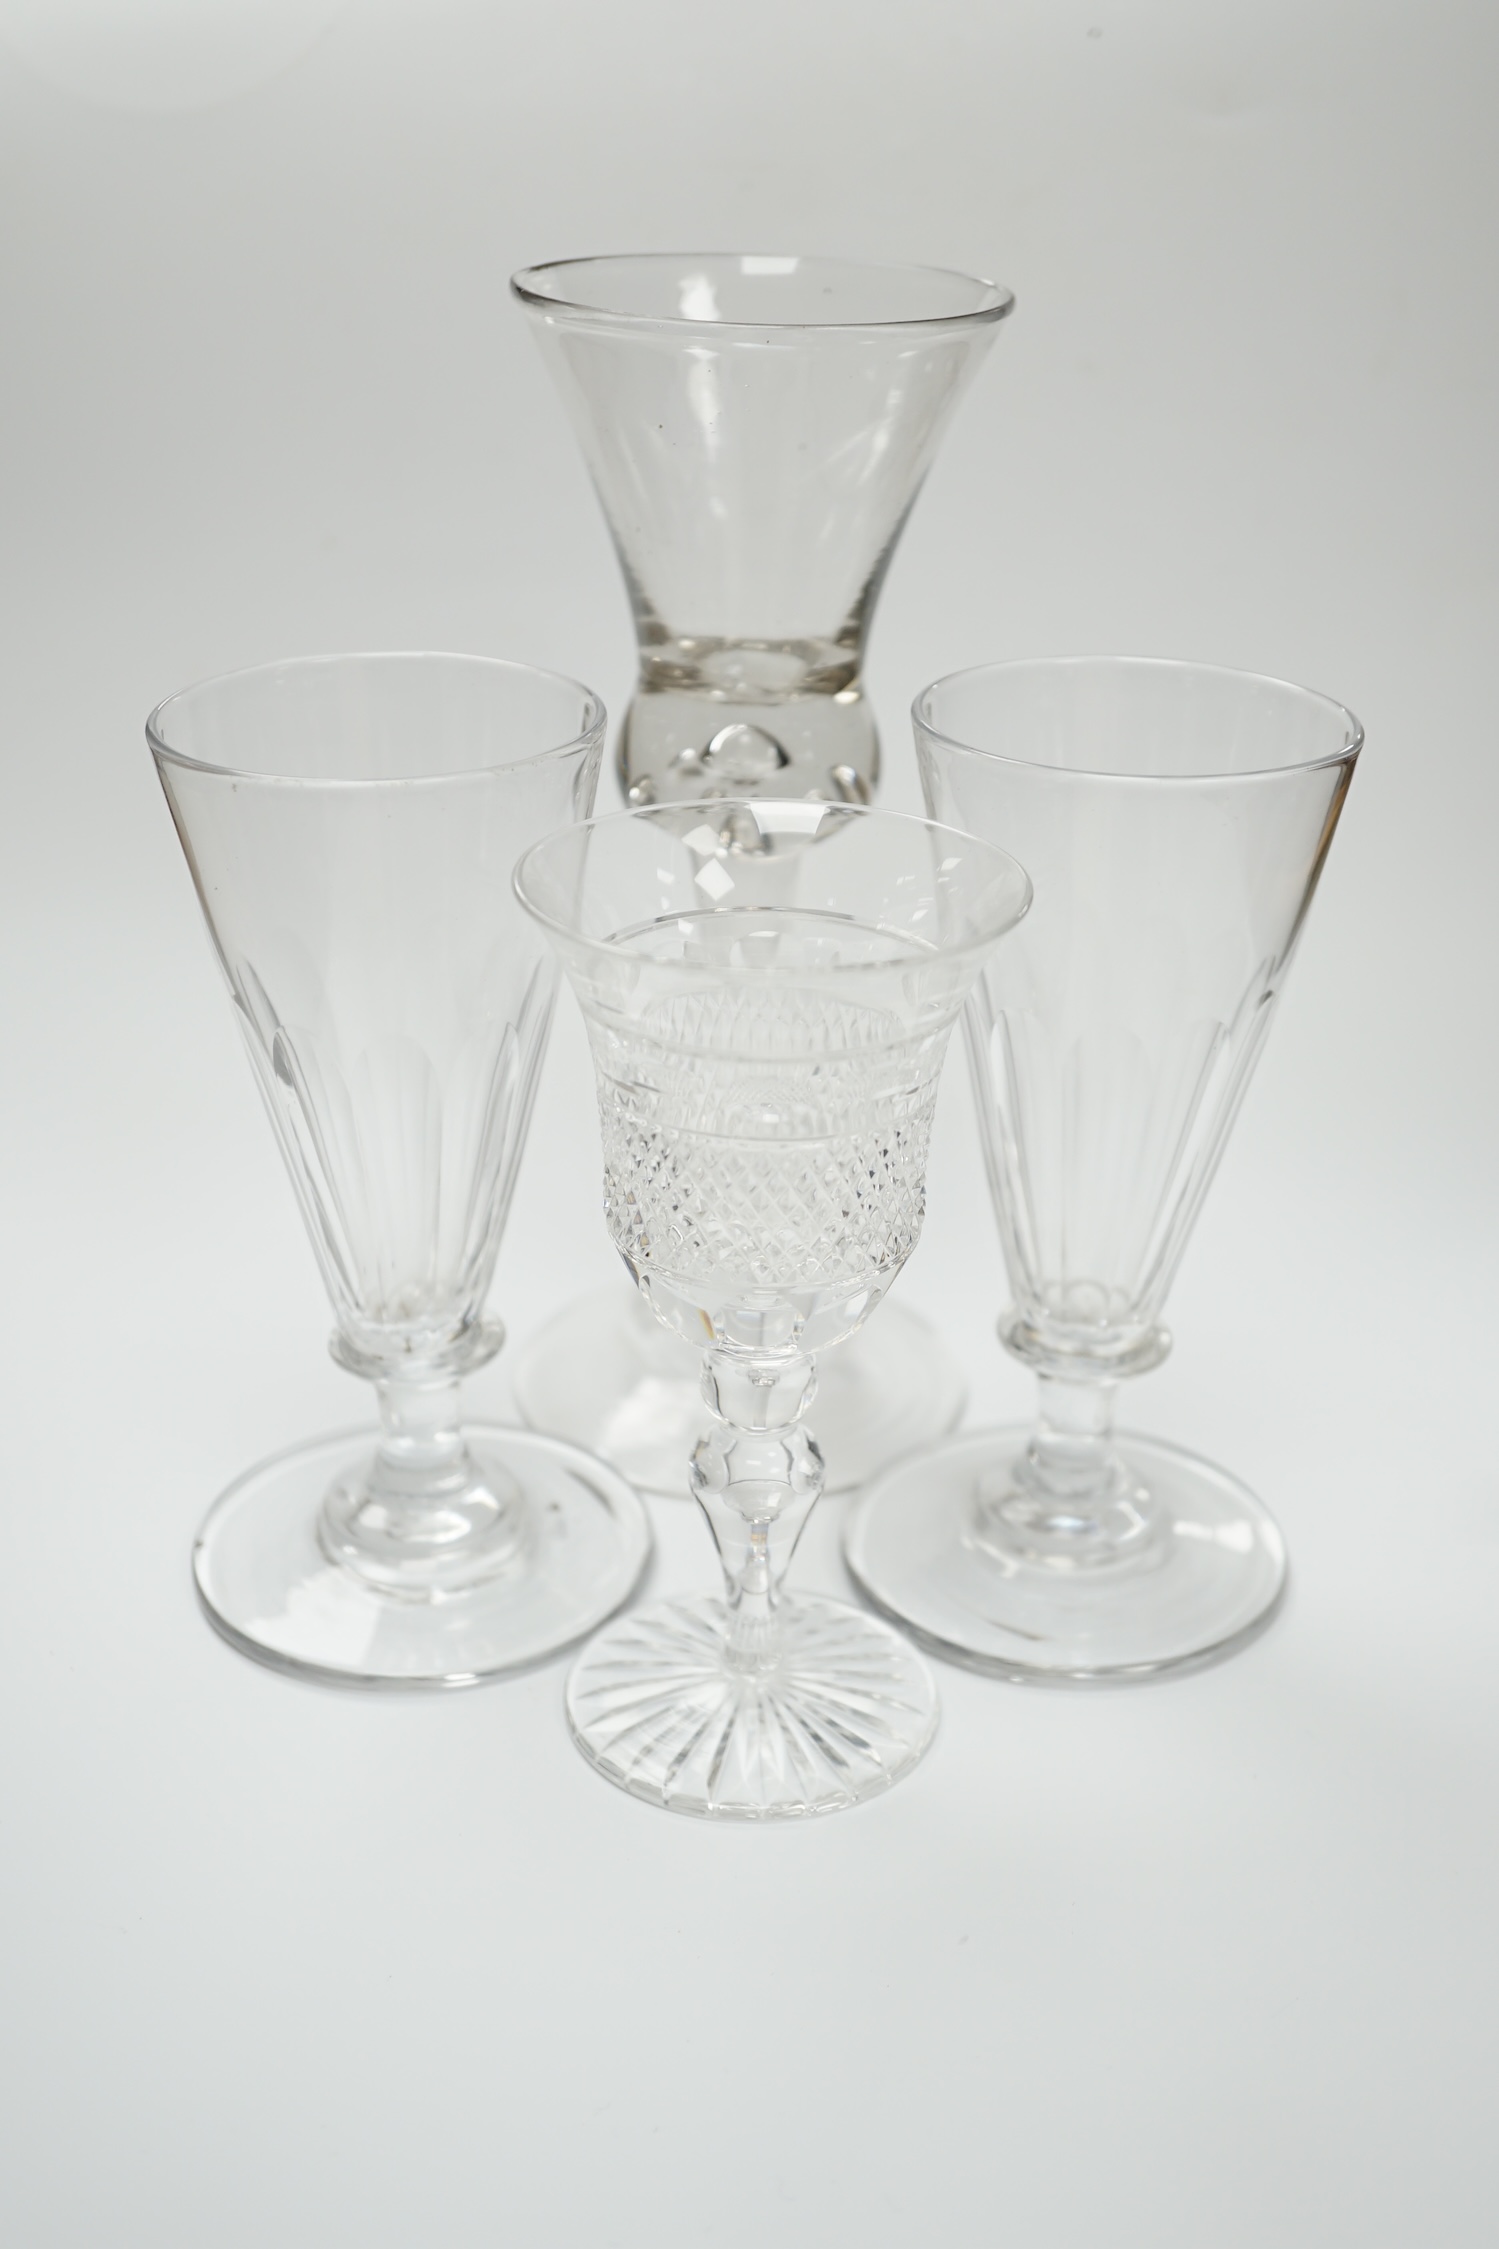 A pair of early 19th century dwarf ale glasses with fluted conical bowls, bladed knop stems and polished pontils, together with a mid-18th century thistle bowl glass with multiple air tears, plain stem and domed foot and